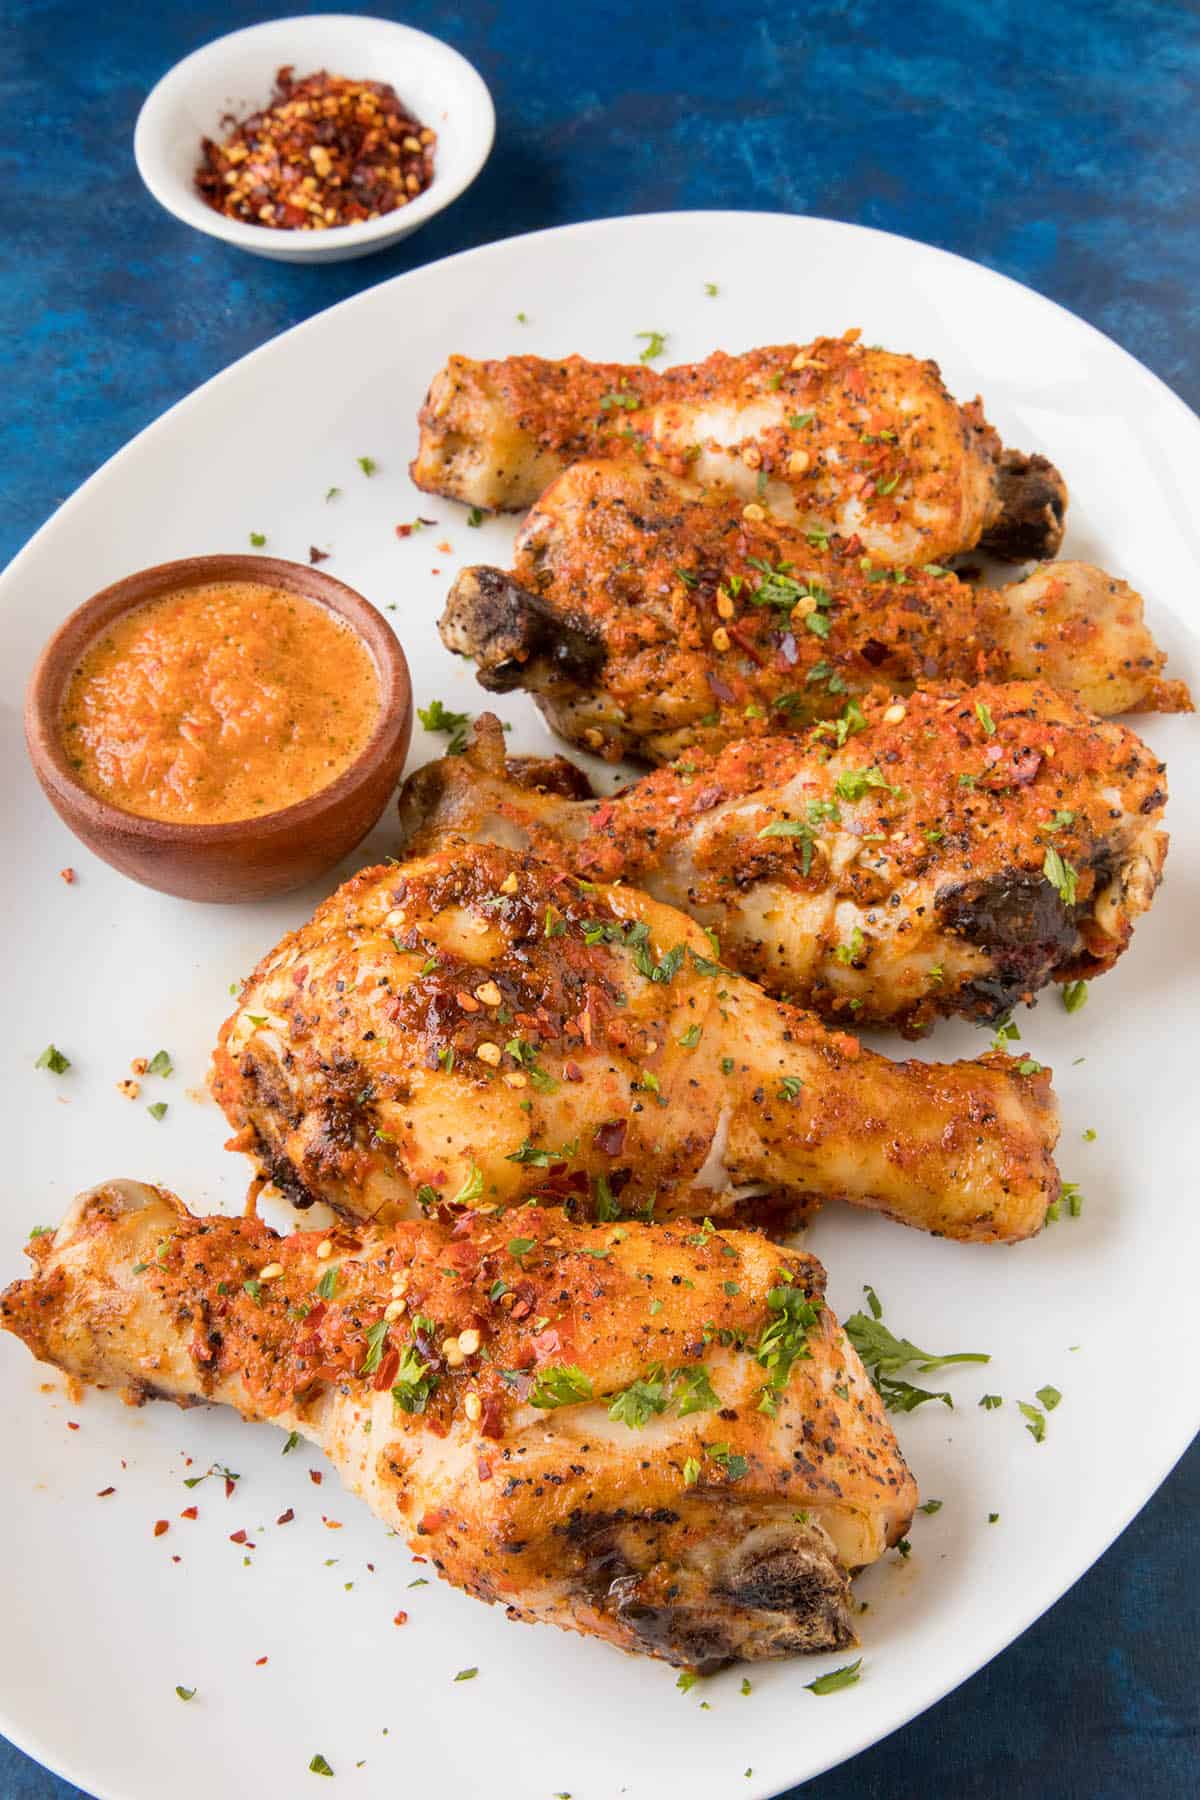 Peri Peri Chicken Legs - Plated and ready to eat